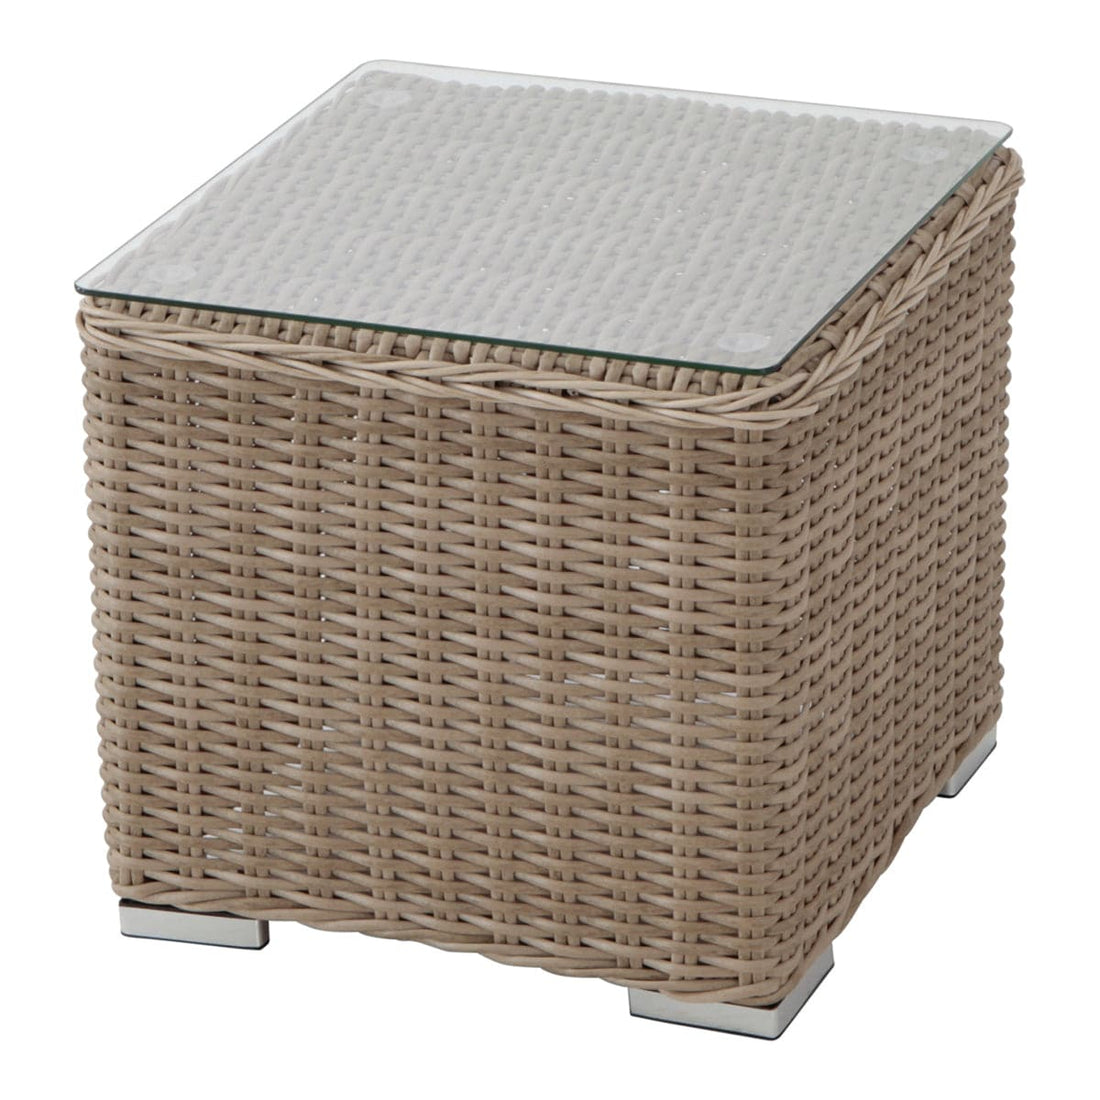 COSTA RICA NATERIAL COFFEE TABLE 45X45 SYNTHETIC WICKER ALUMINIUM AND GLASS - best price from Maltashopper.com BR500012500